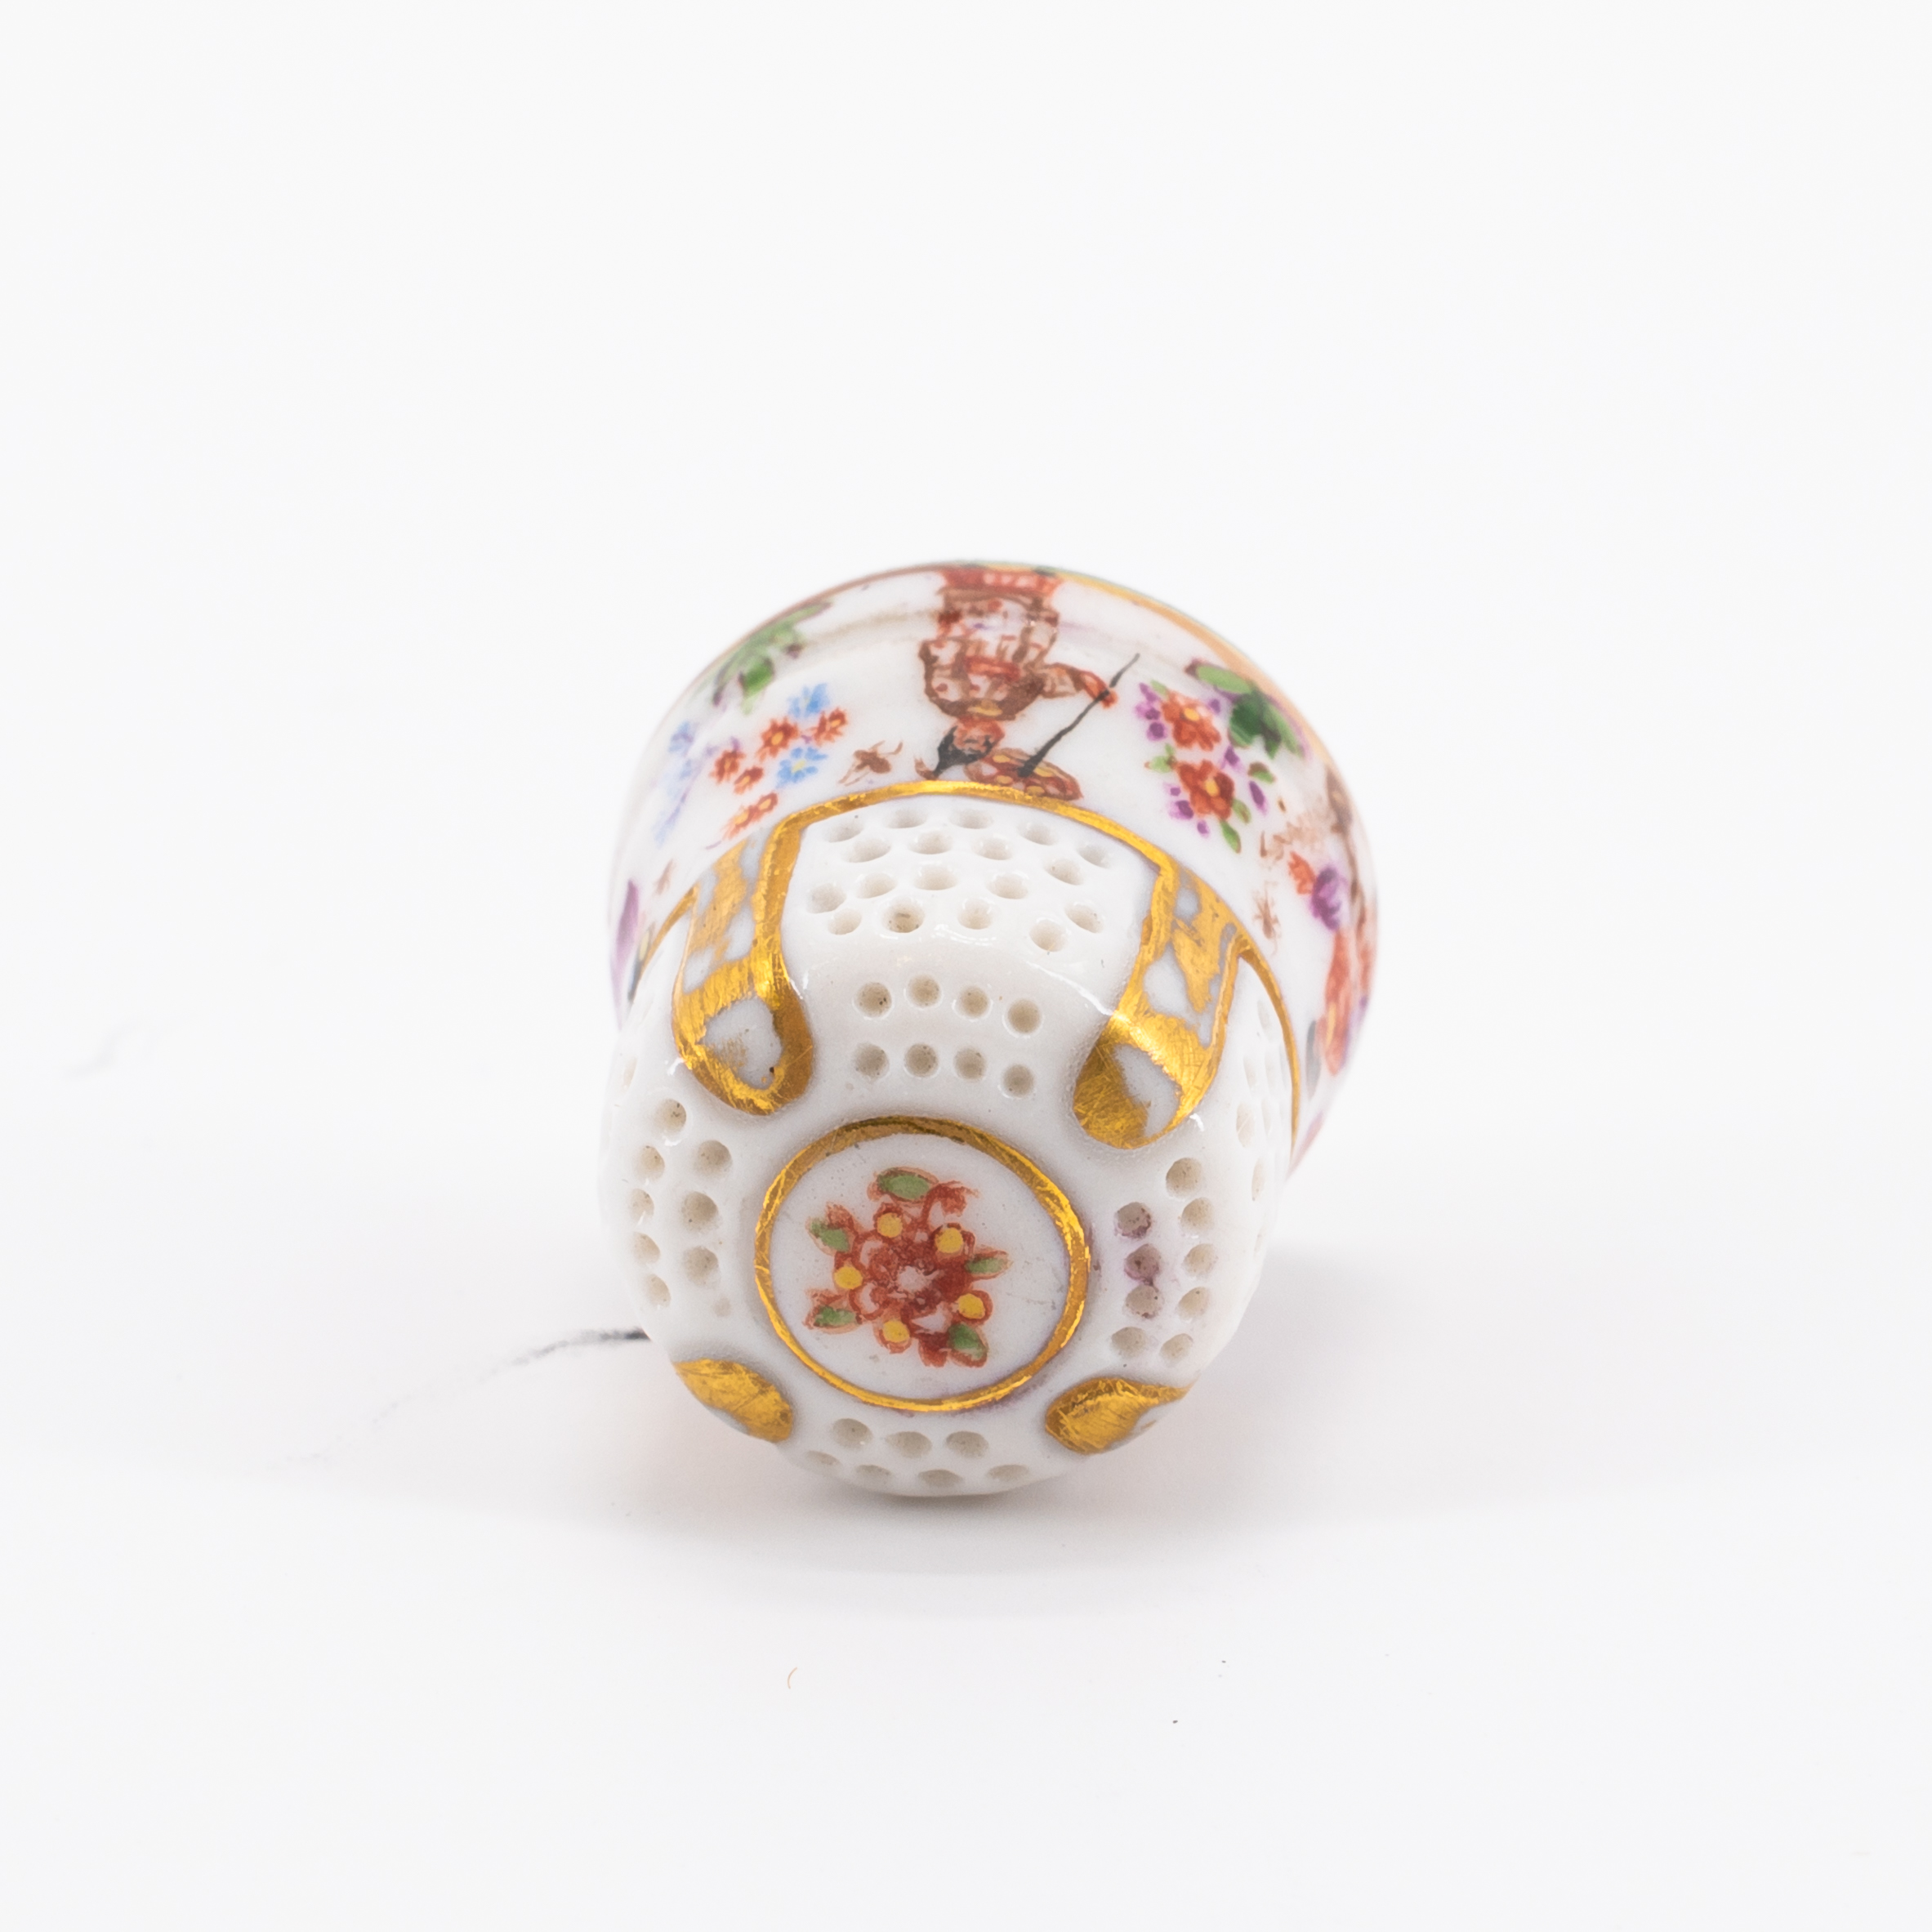 RARE PORCELAIN THIMBLE WITH VERY FINELY COLOURED CHINOISERIES - Image 5 of 6